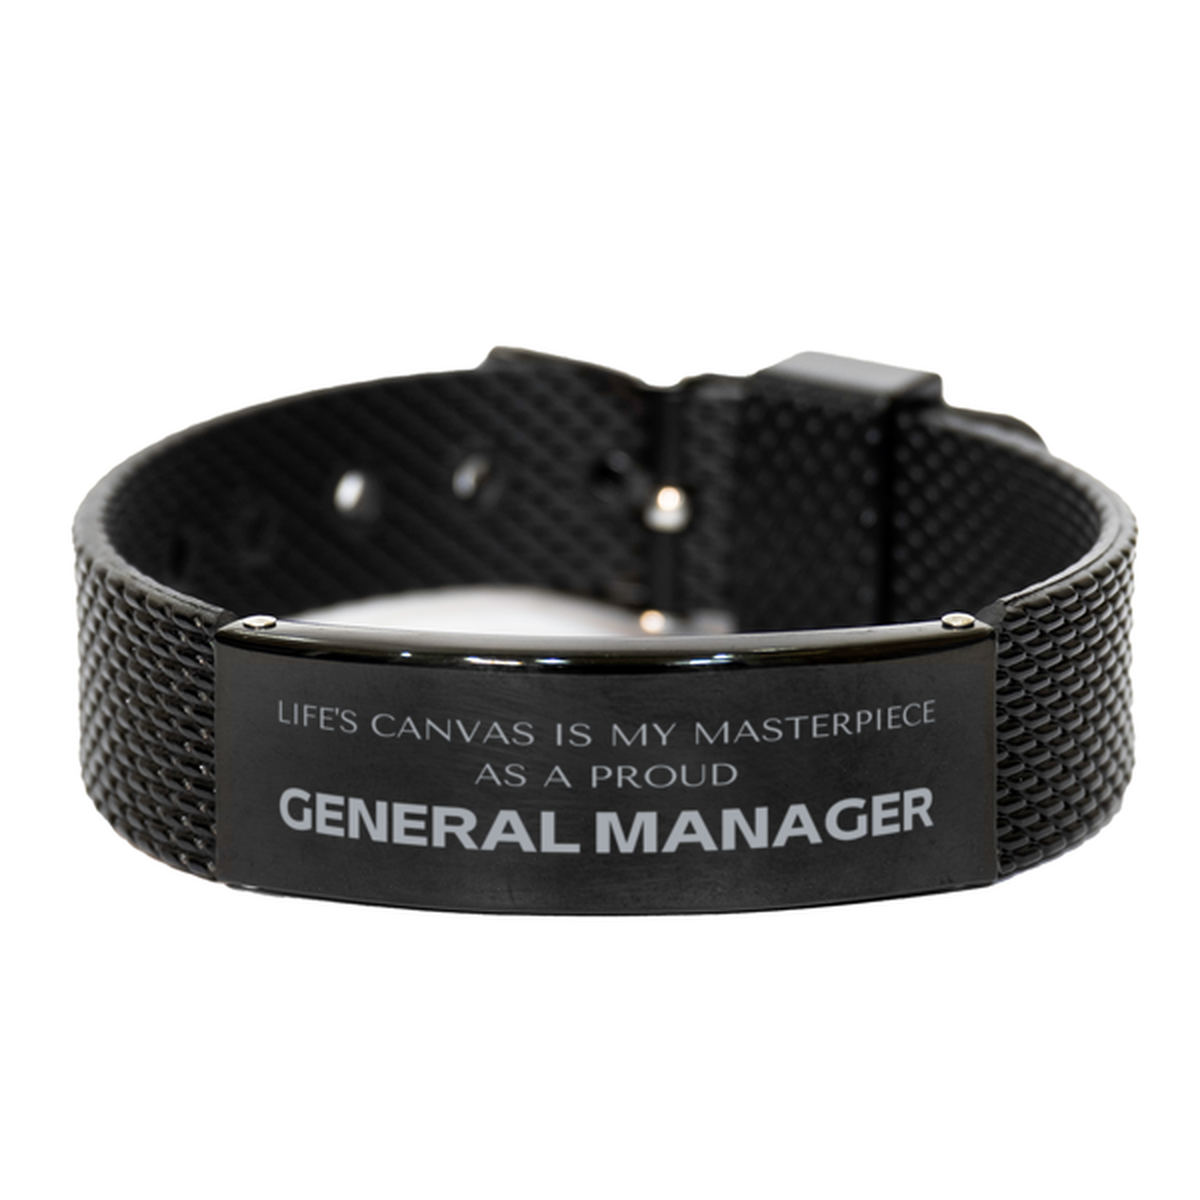 Proud General Manager Gifts, Life's canvas is my masterpiece, Epic Birthday Christmas Unique Black Shark Mesh Bracelet For General Manager, Coworkers, Men, Women, Friends